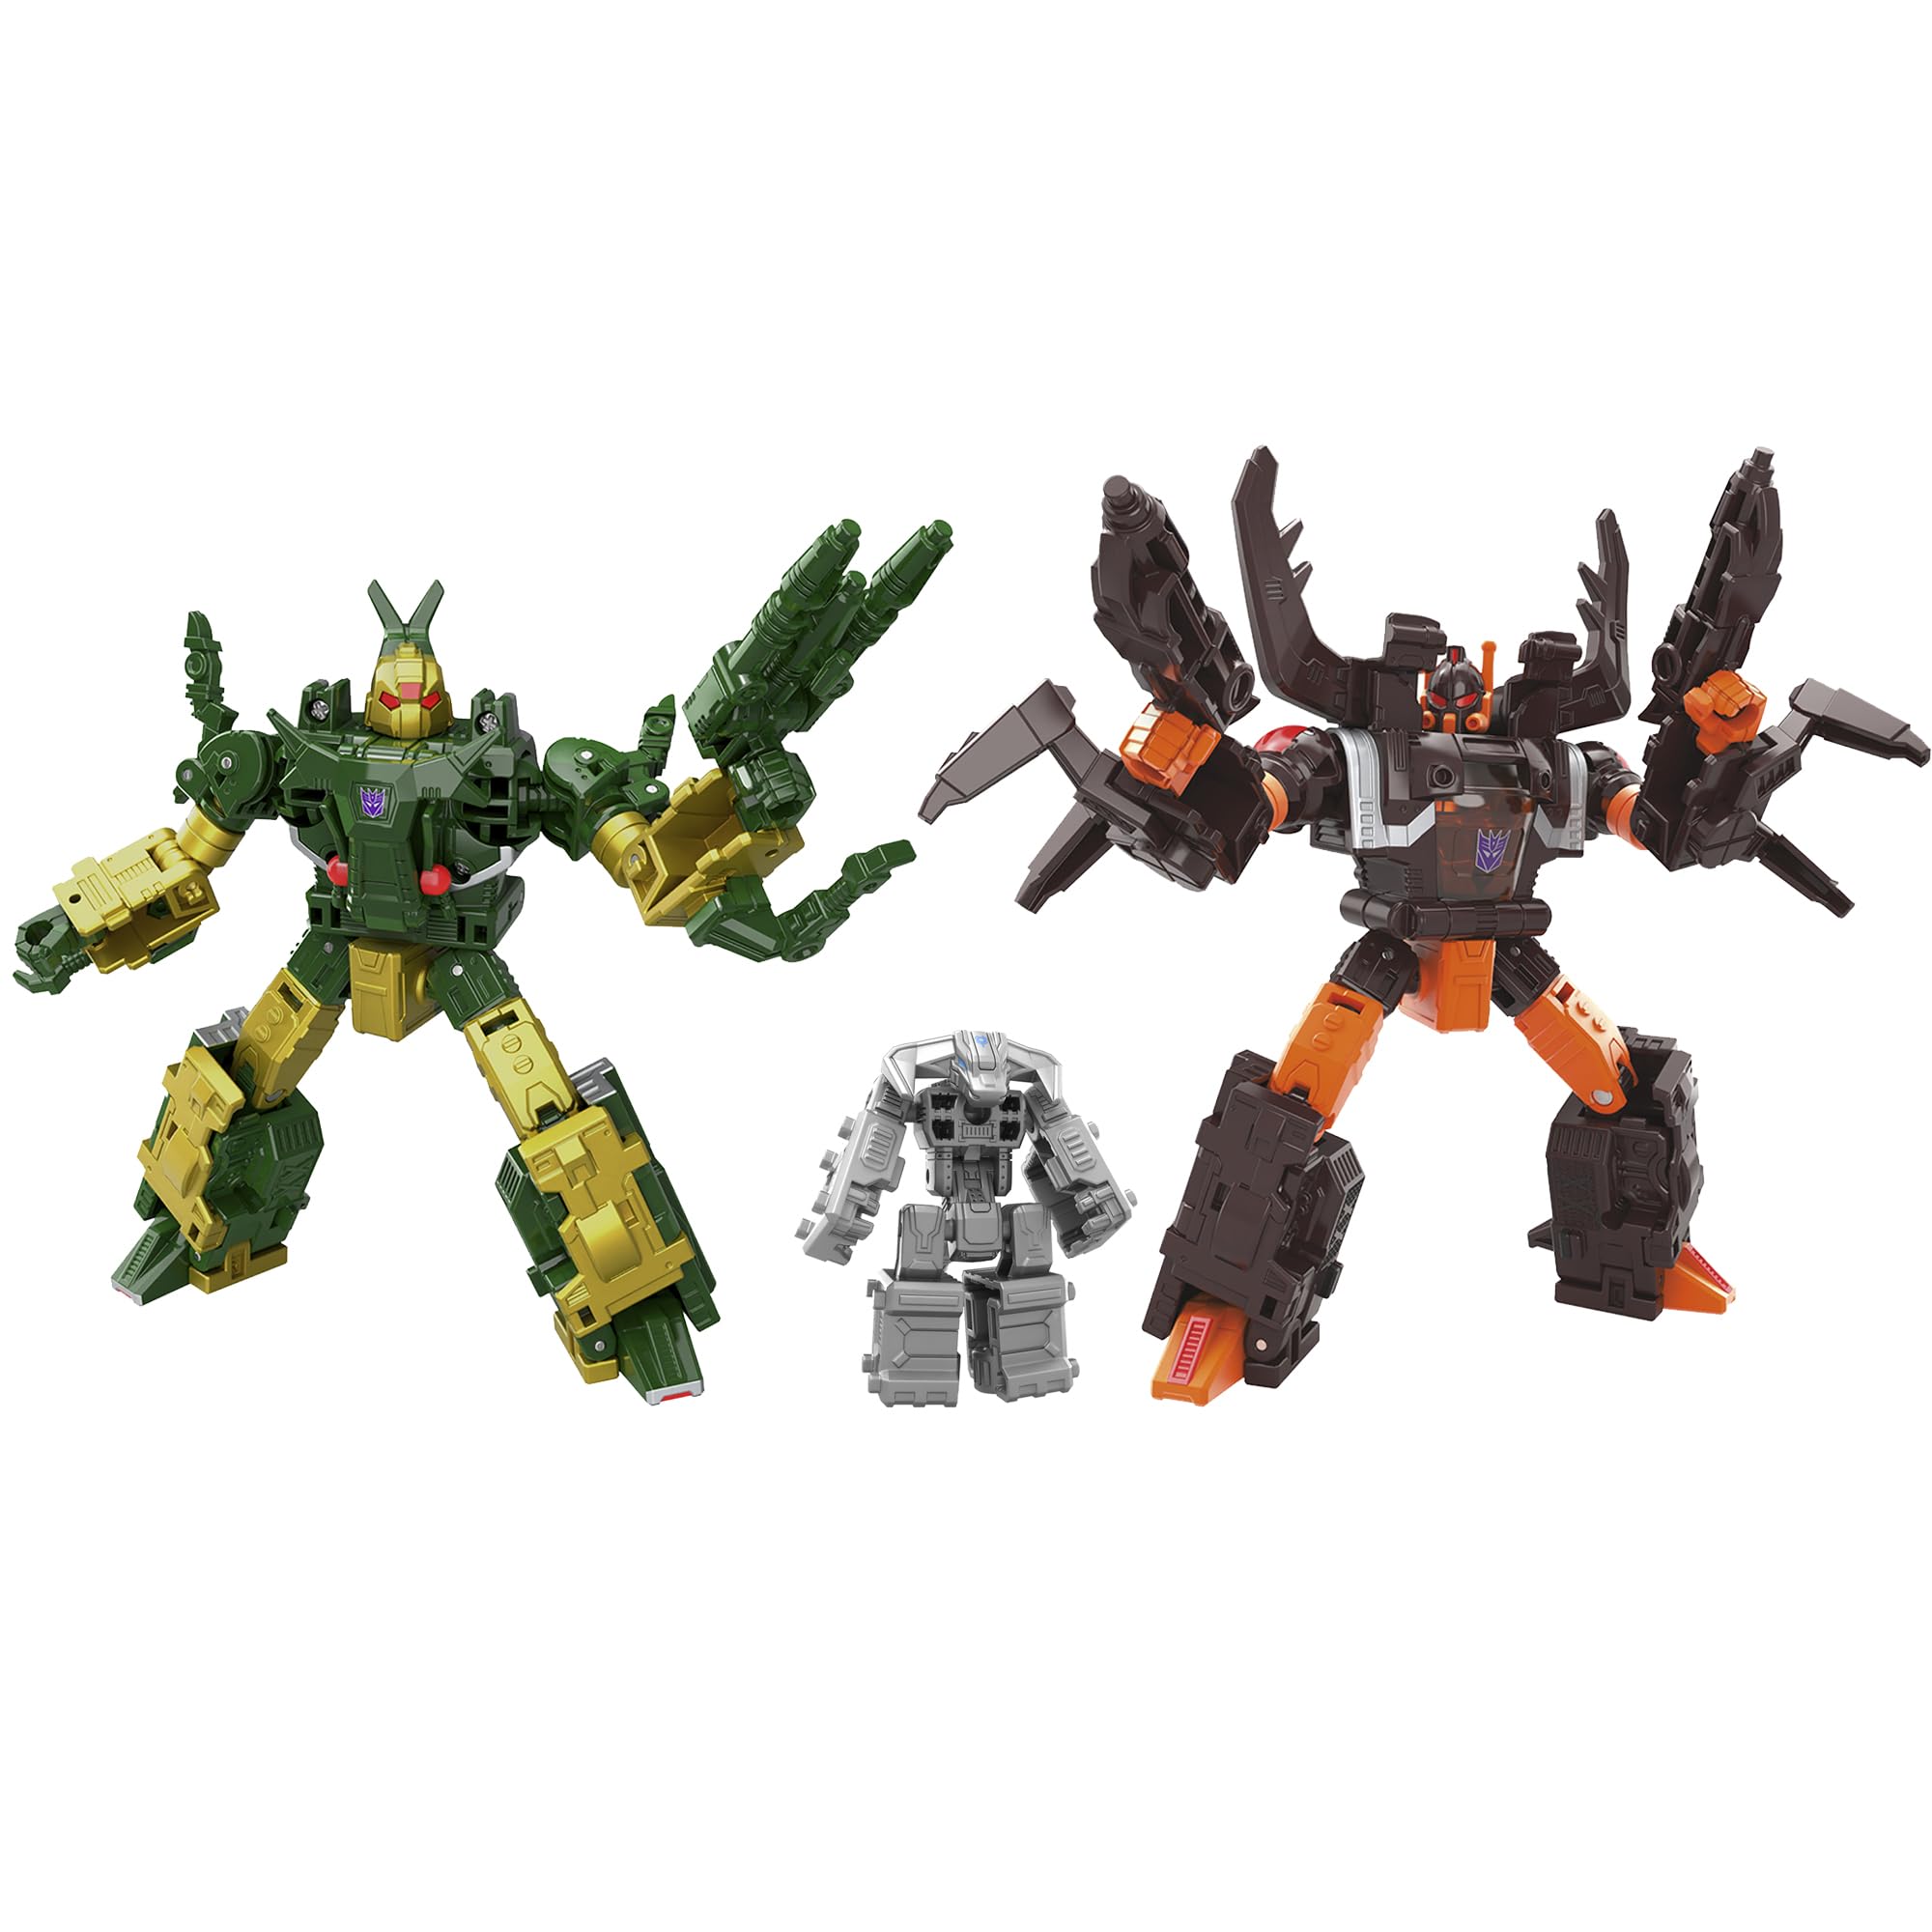 Transformers Legacy United Doom ‘n Destruction Collection, Mayhem Attack Squad Converting Action Figure 3-Pack, Chop Shop & Barrage, 8+ Years (Amazon Exclusive)